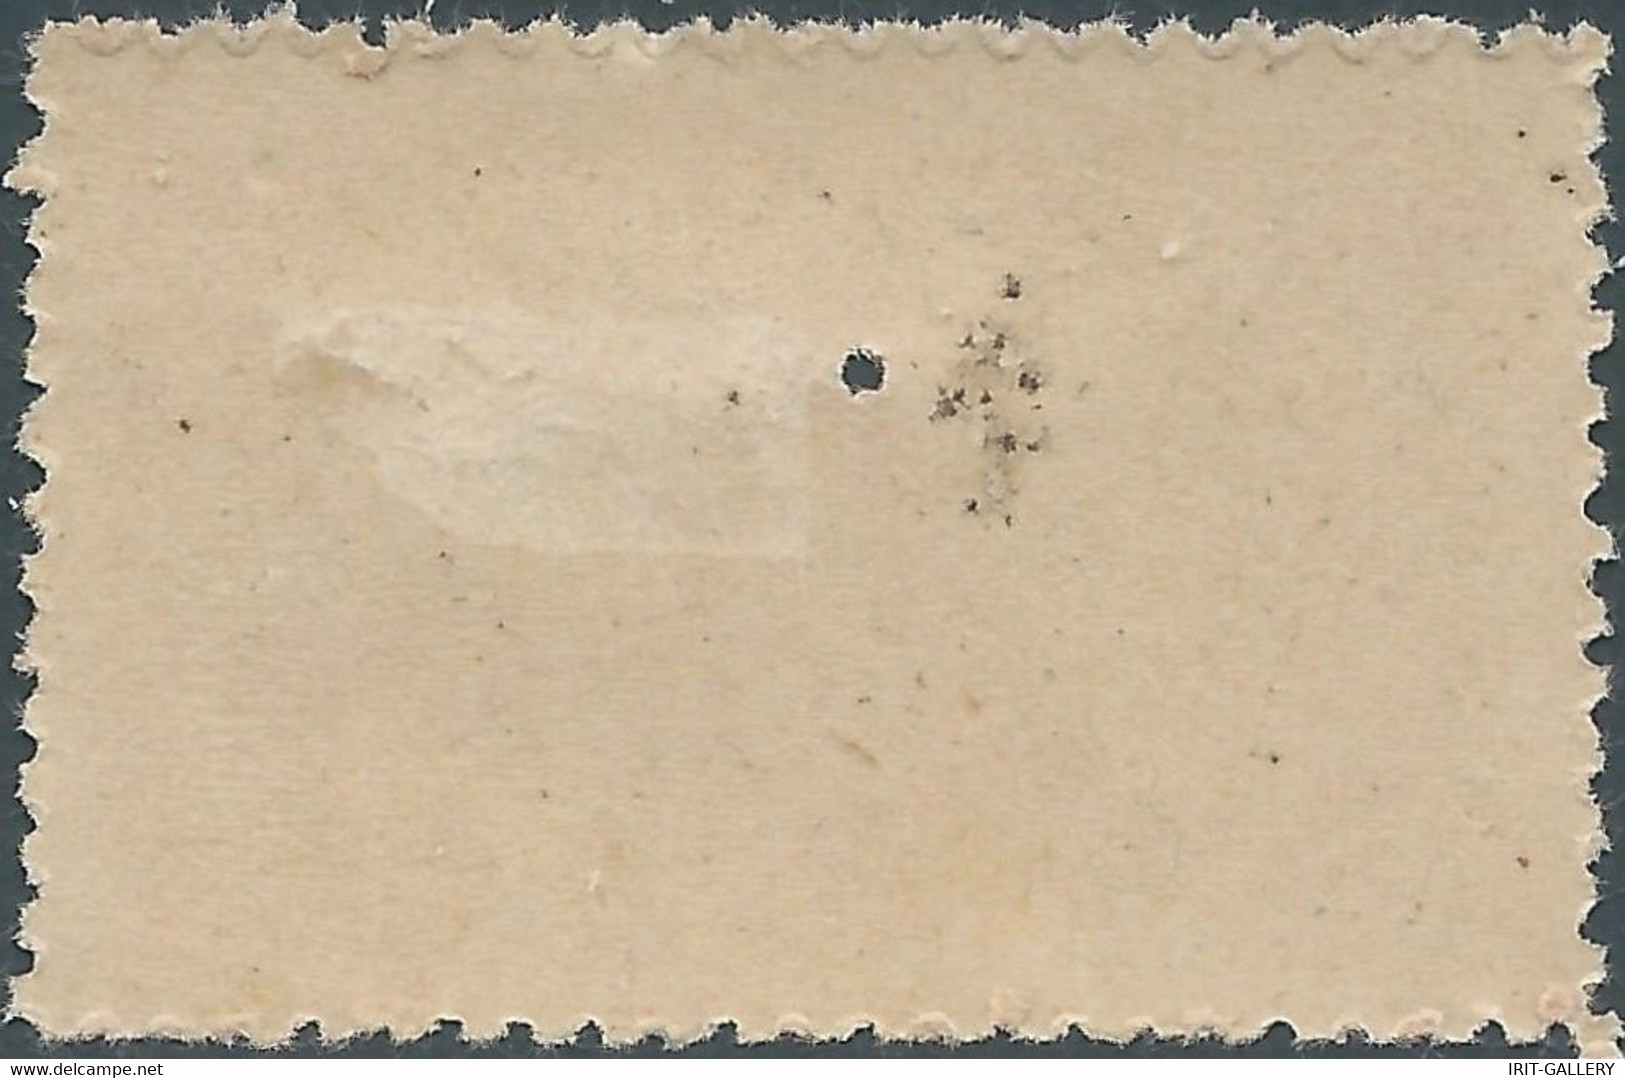 France,Paris 1900 UNIVERSAL EXHIBITION OF Bosnia ,Trace Of Hinged & Drilled !!! - 1900 – Pariis (France)